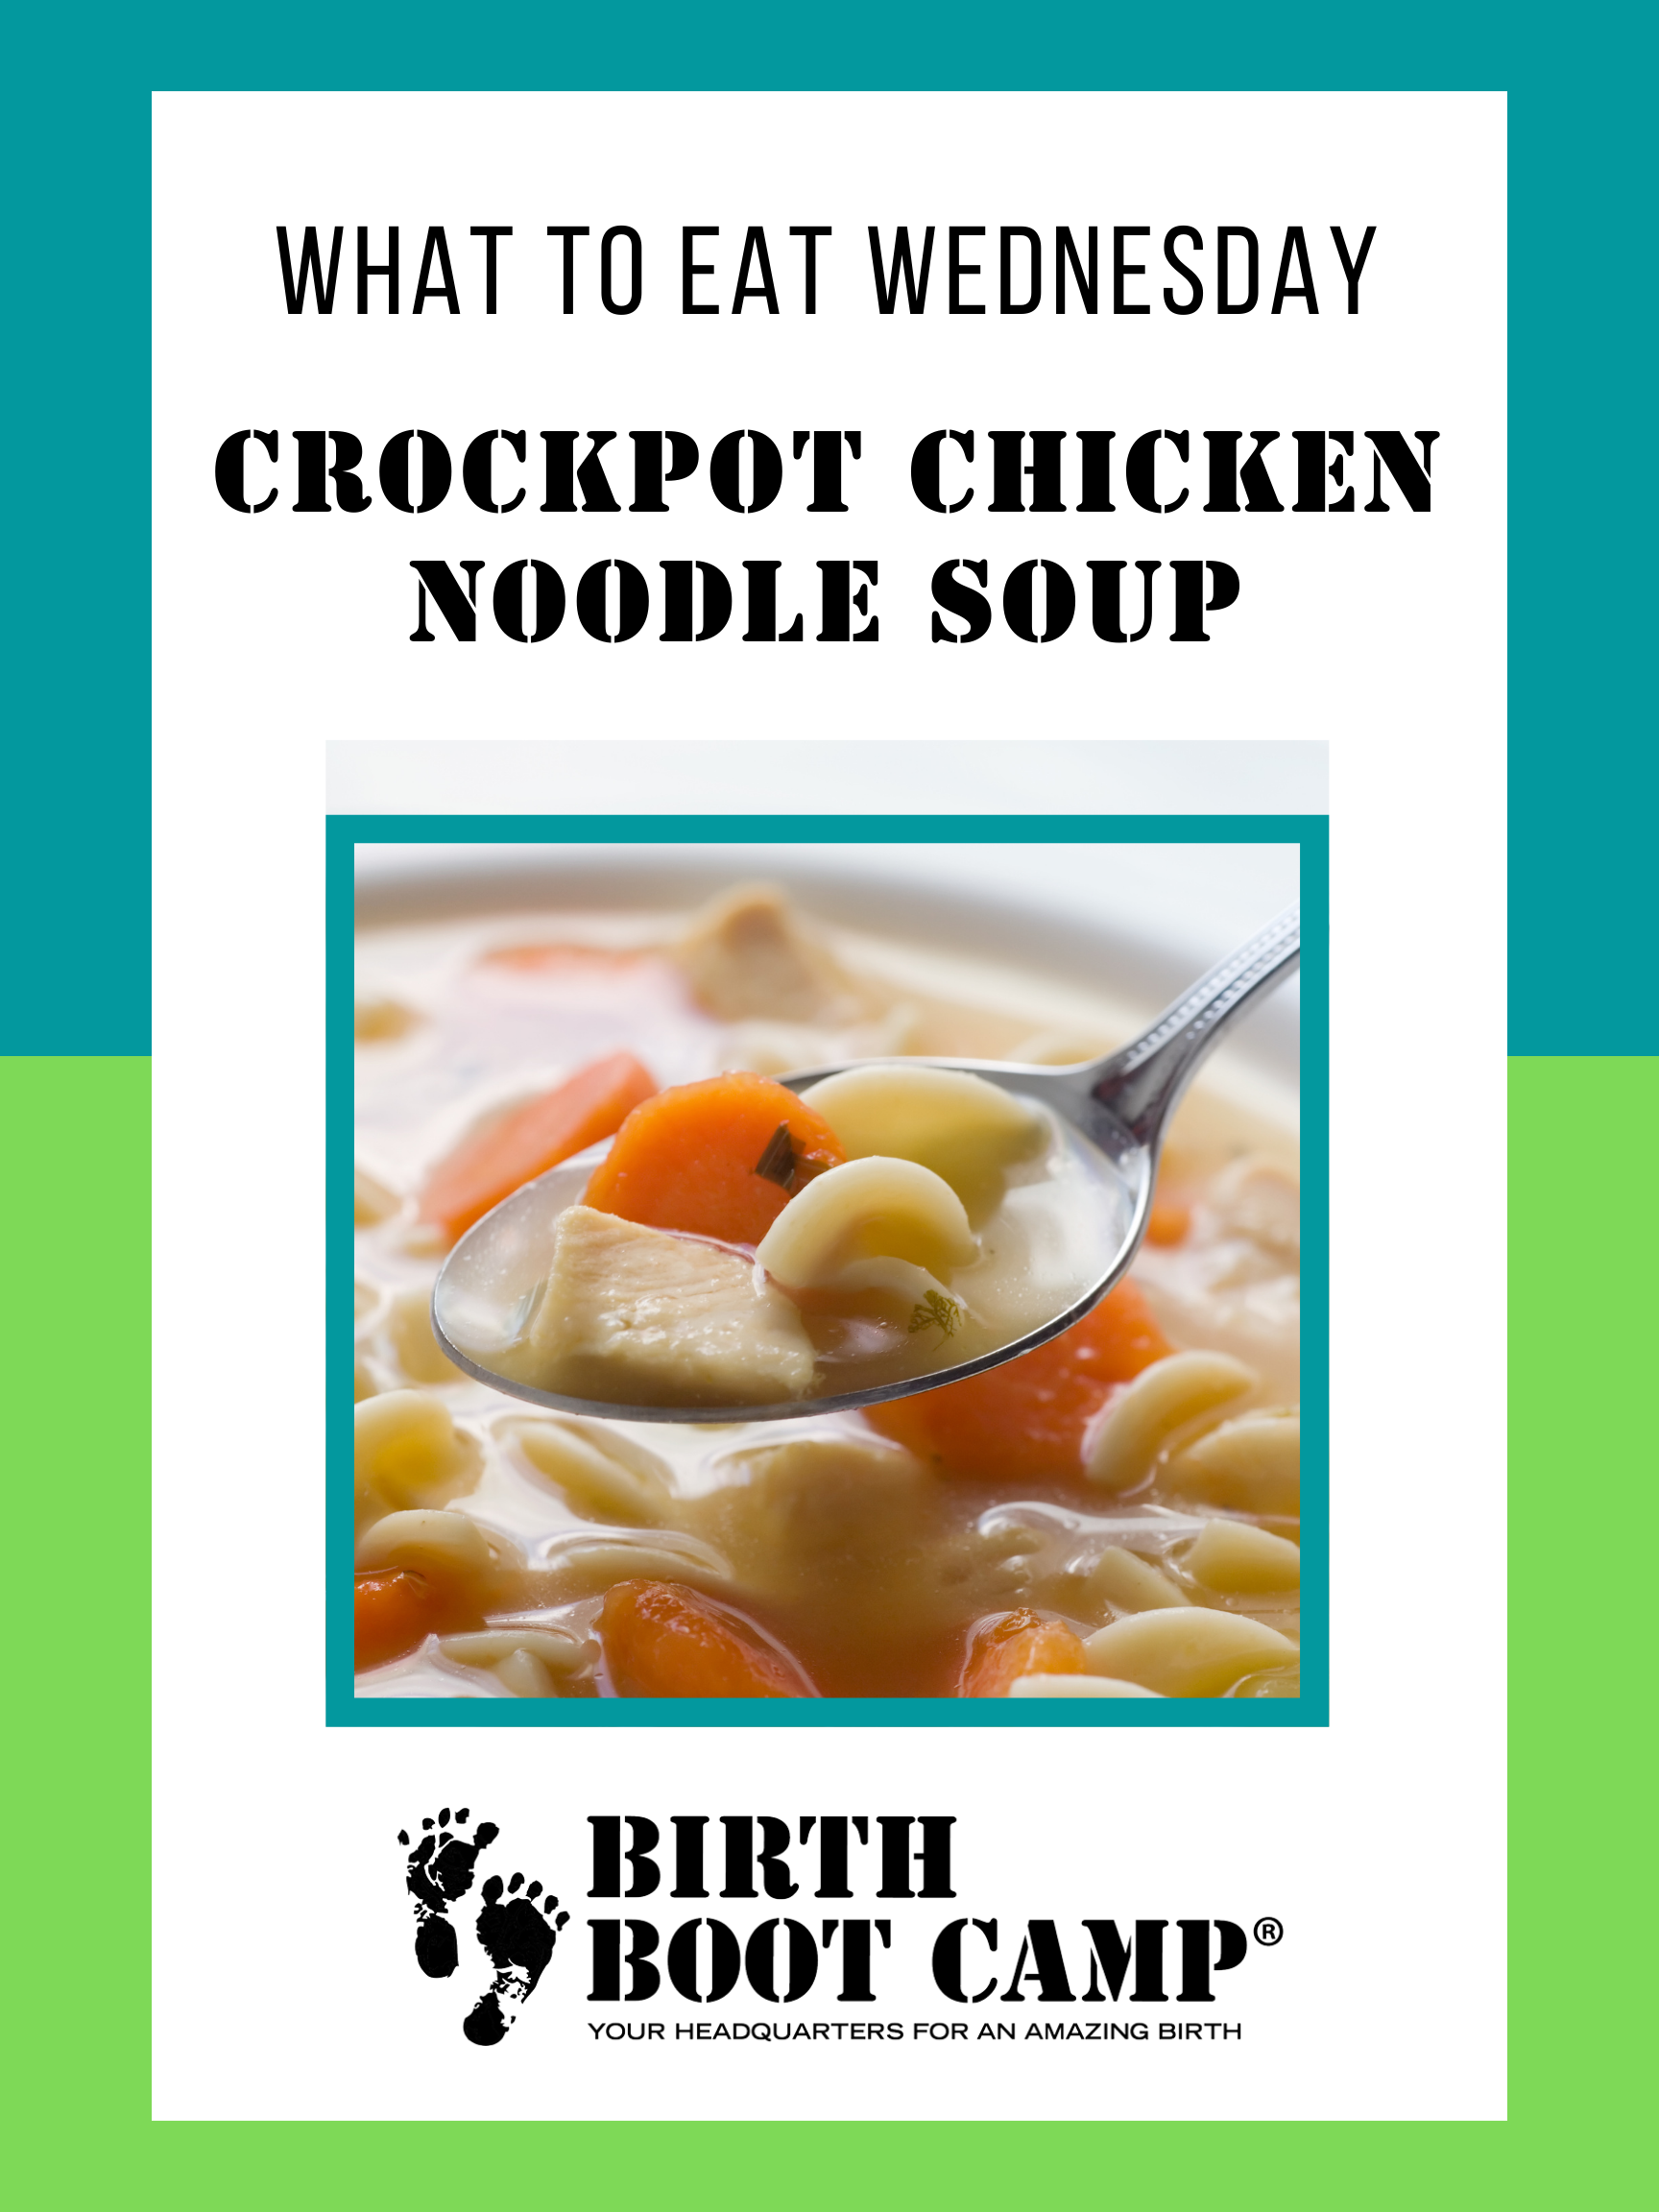 What to Eat Wednesday – Crockpot Chicken Noodle Soup